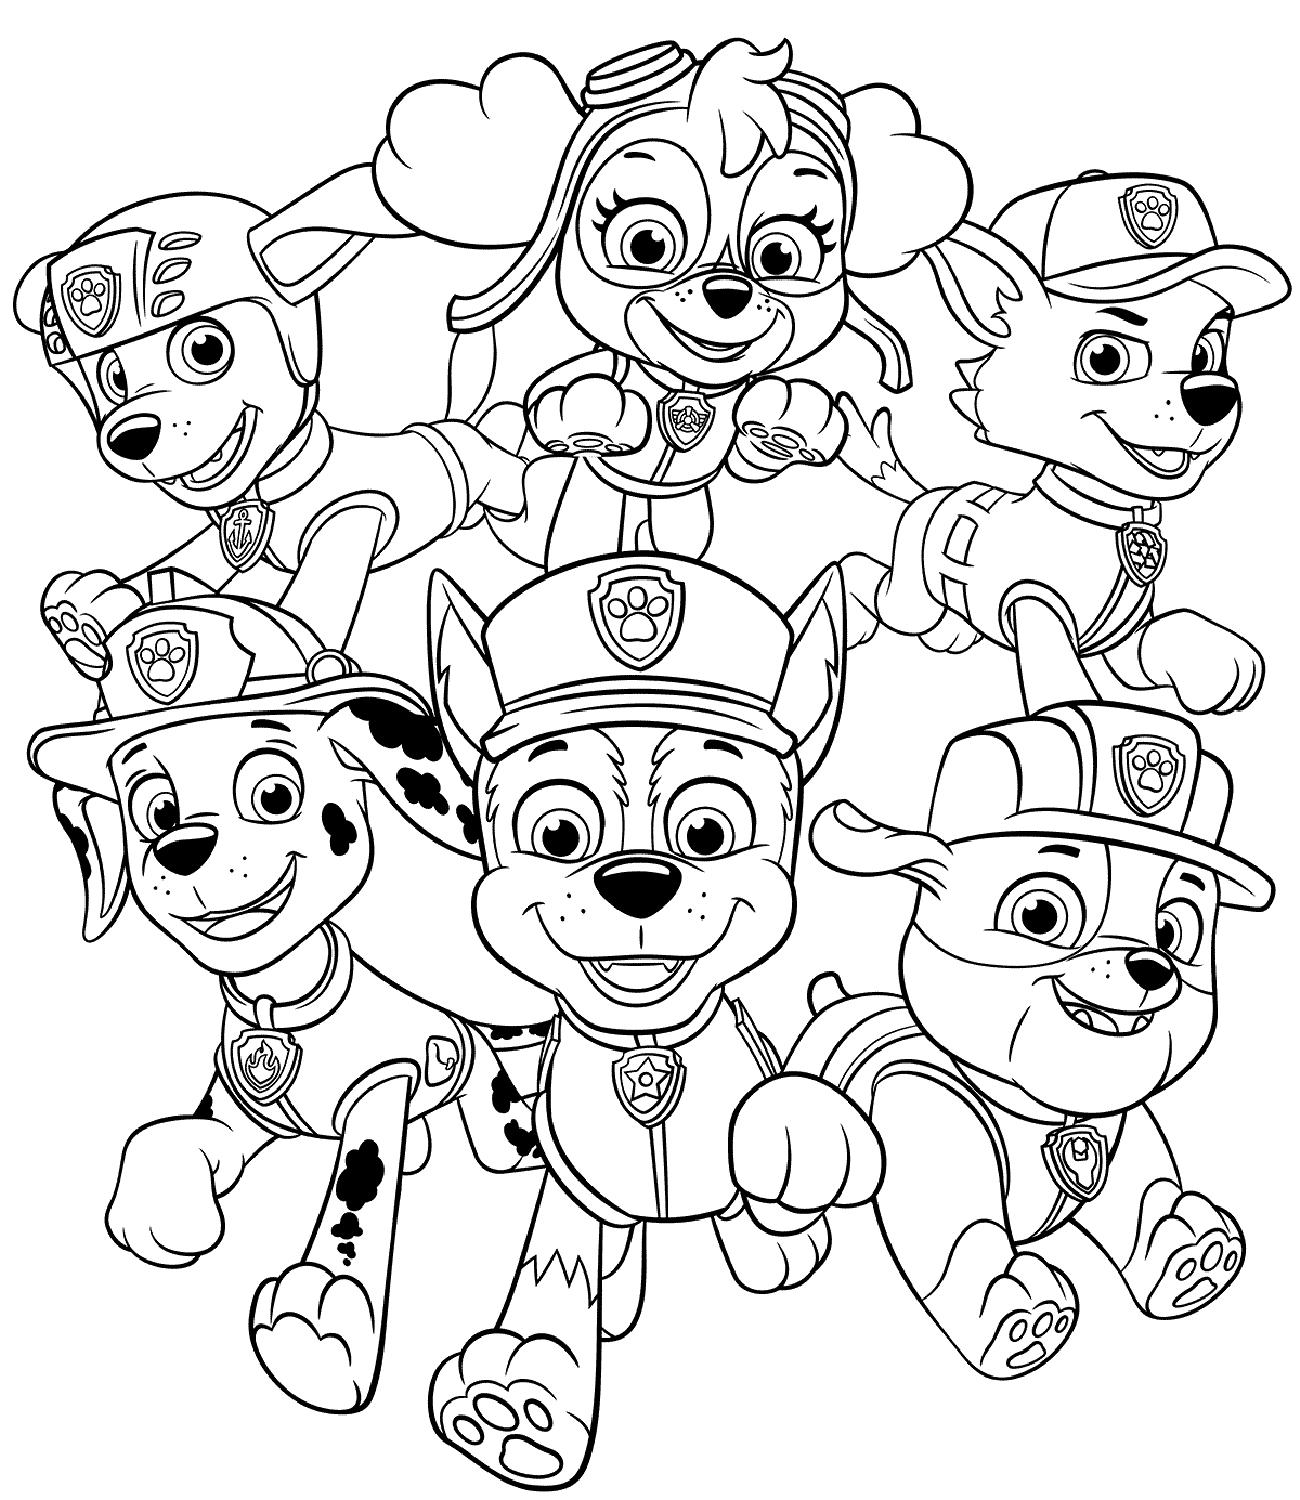 Rubble and his friends in Paw Patrol